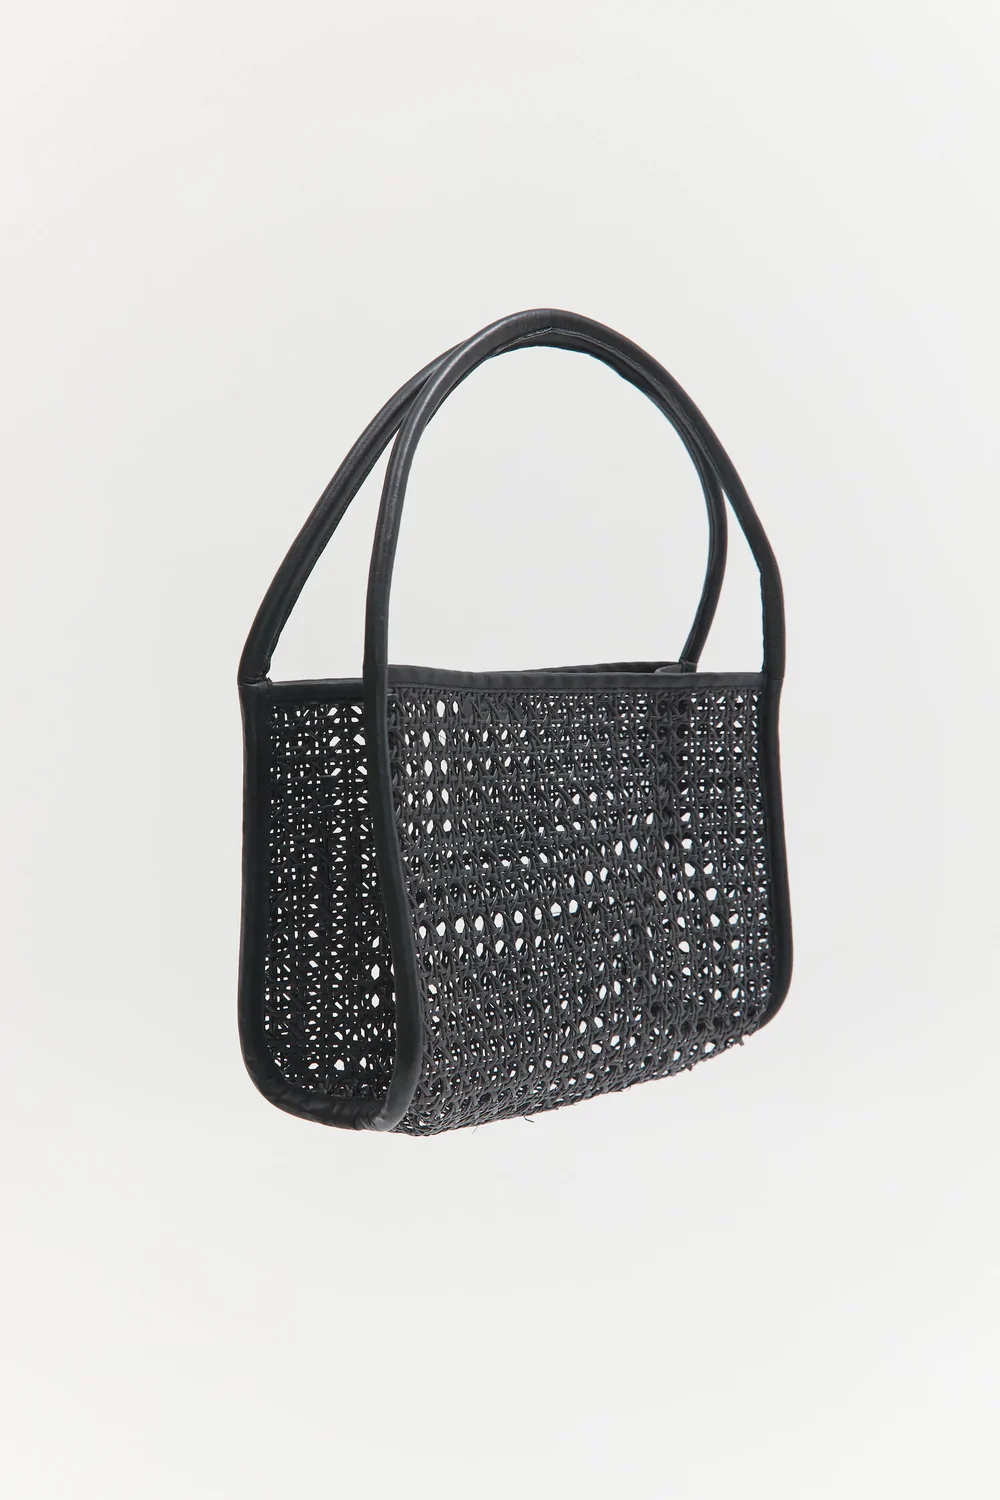 Product Image for Rattan Small Tote, Black